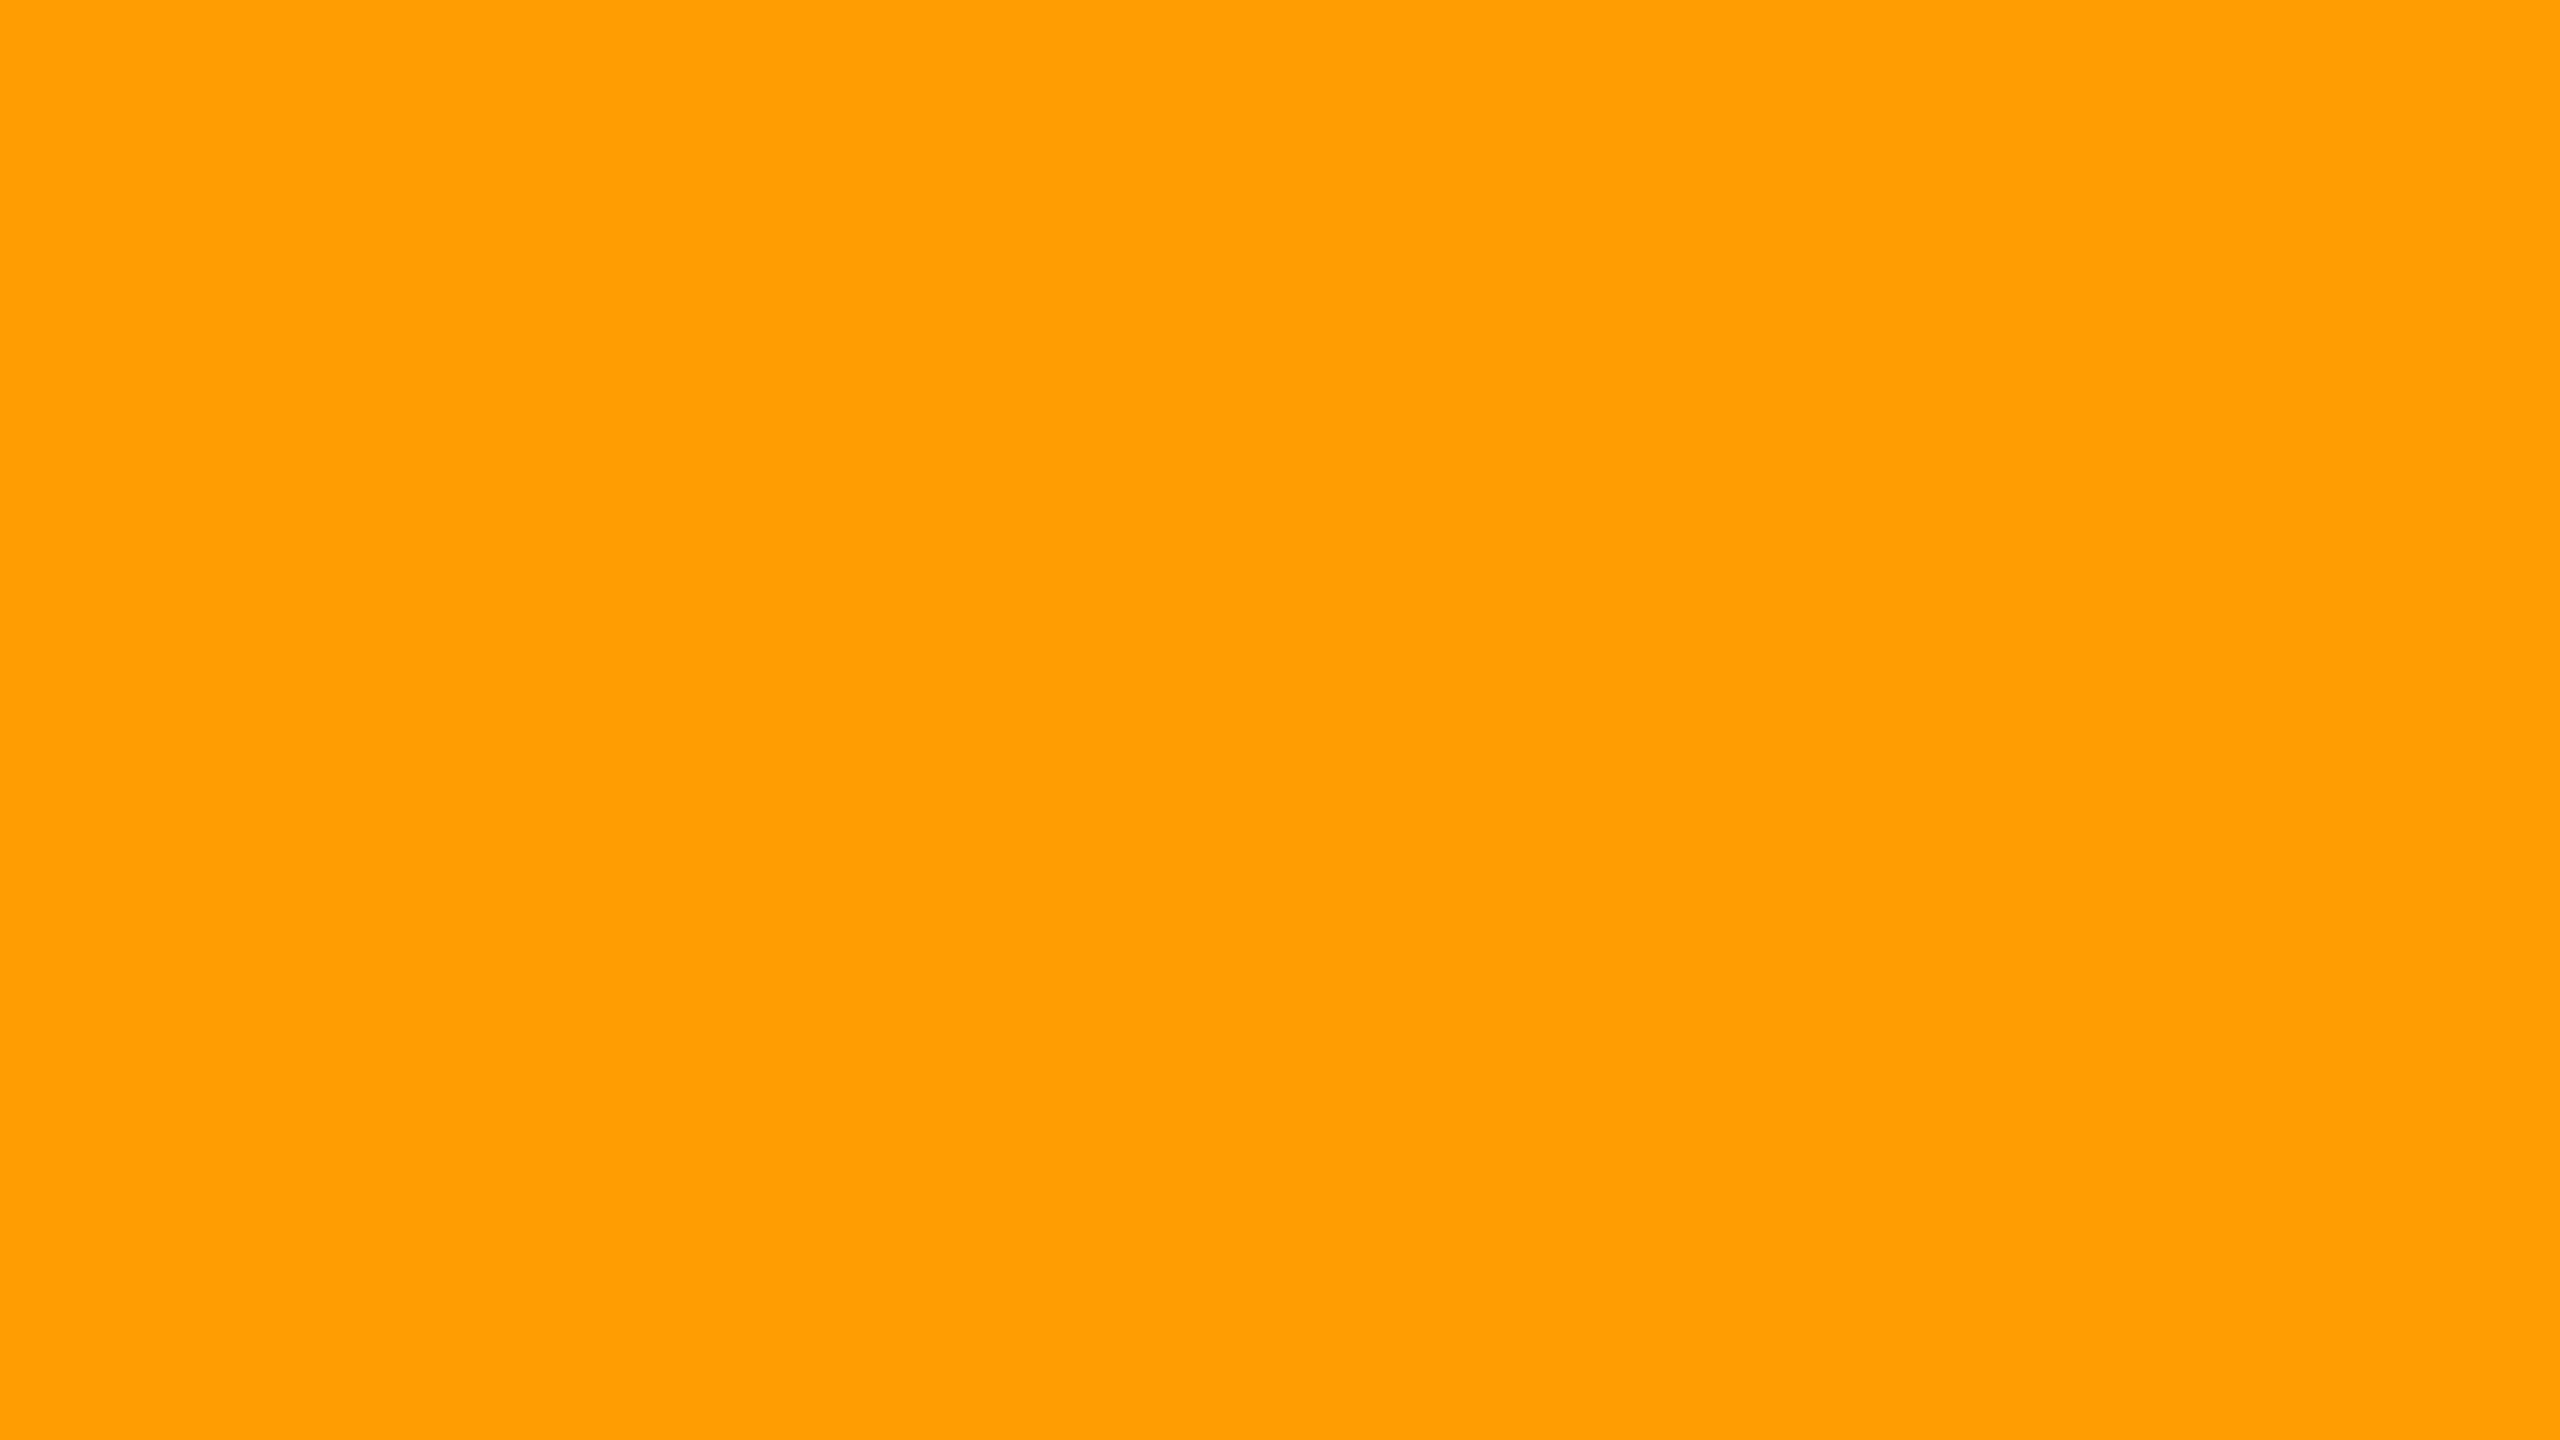 An abstract and vibrant light orange background